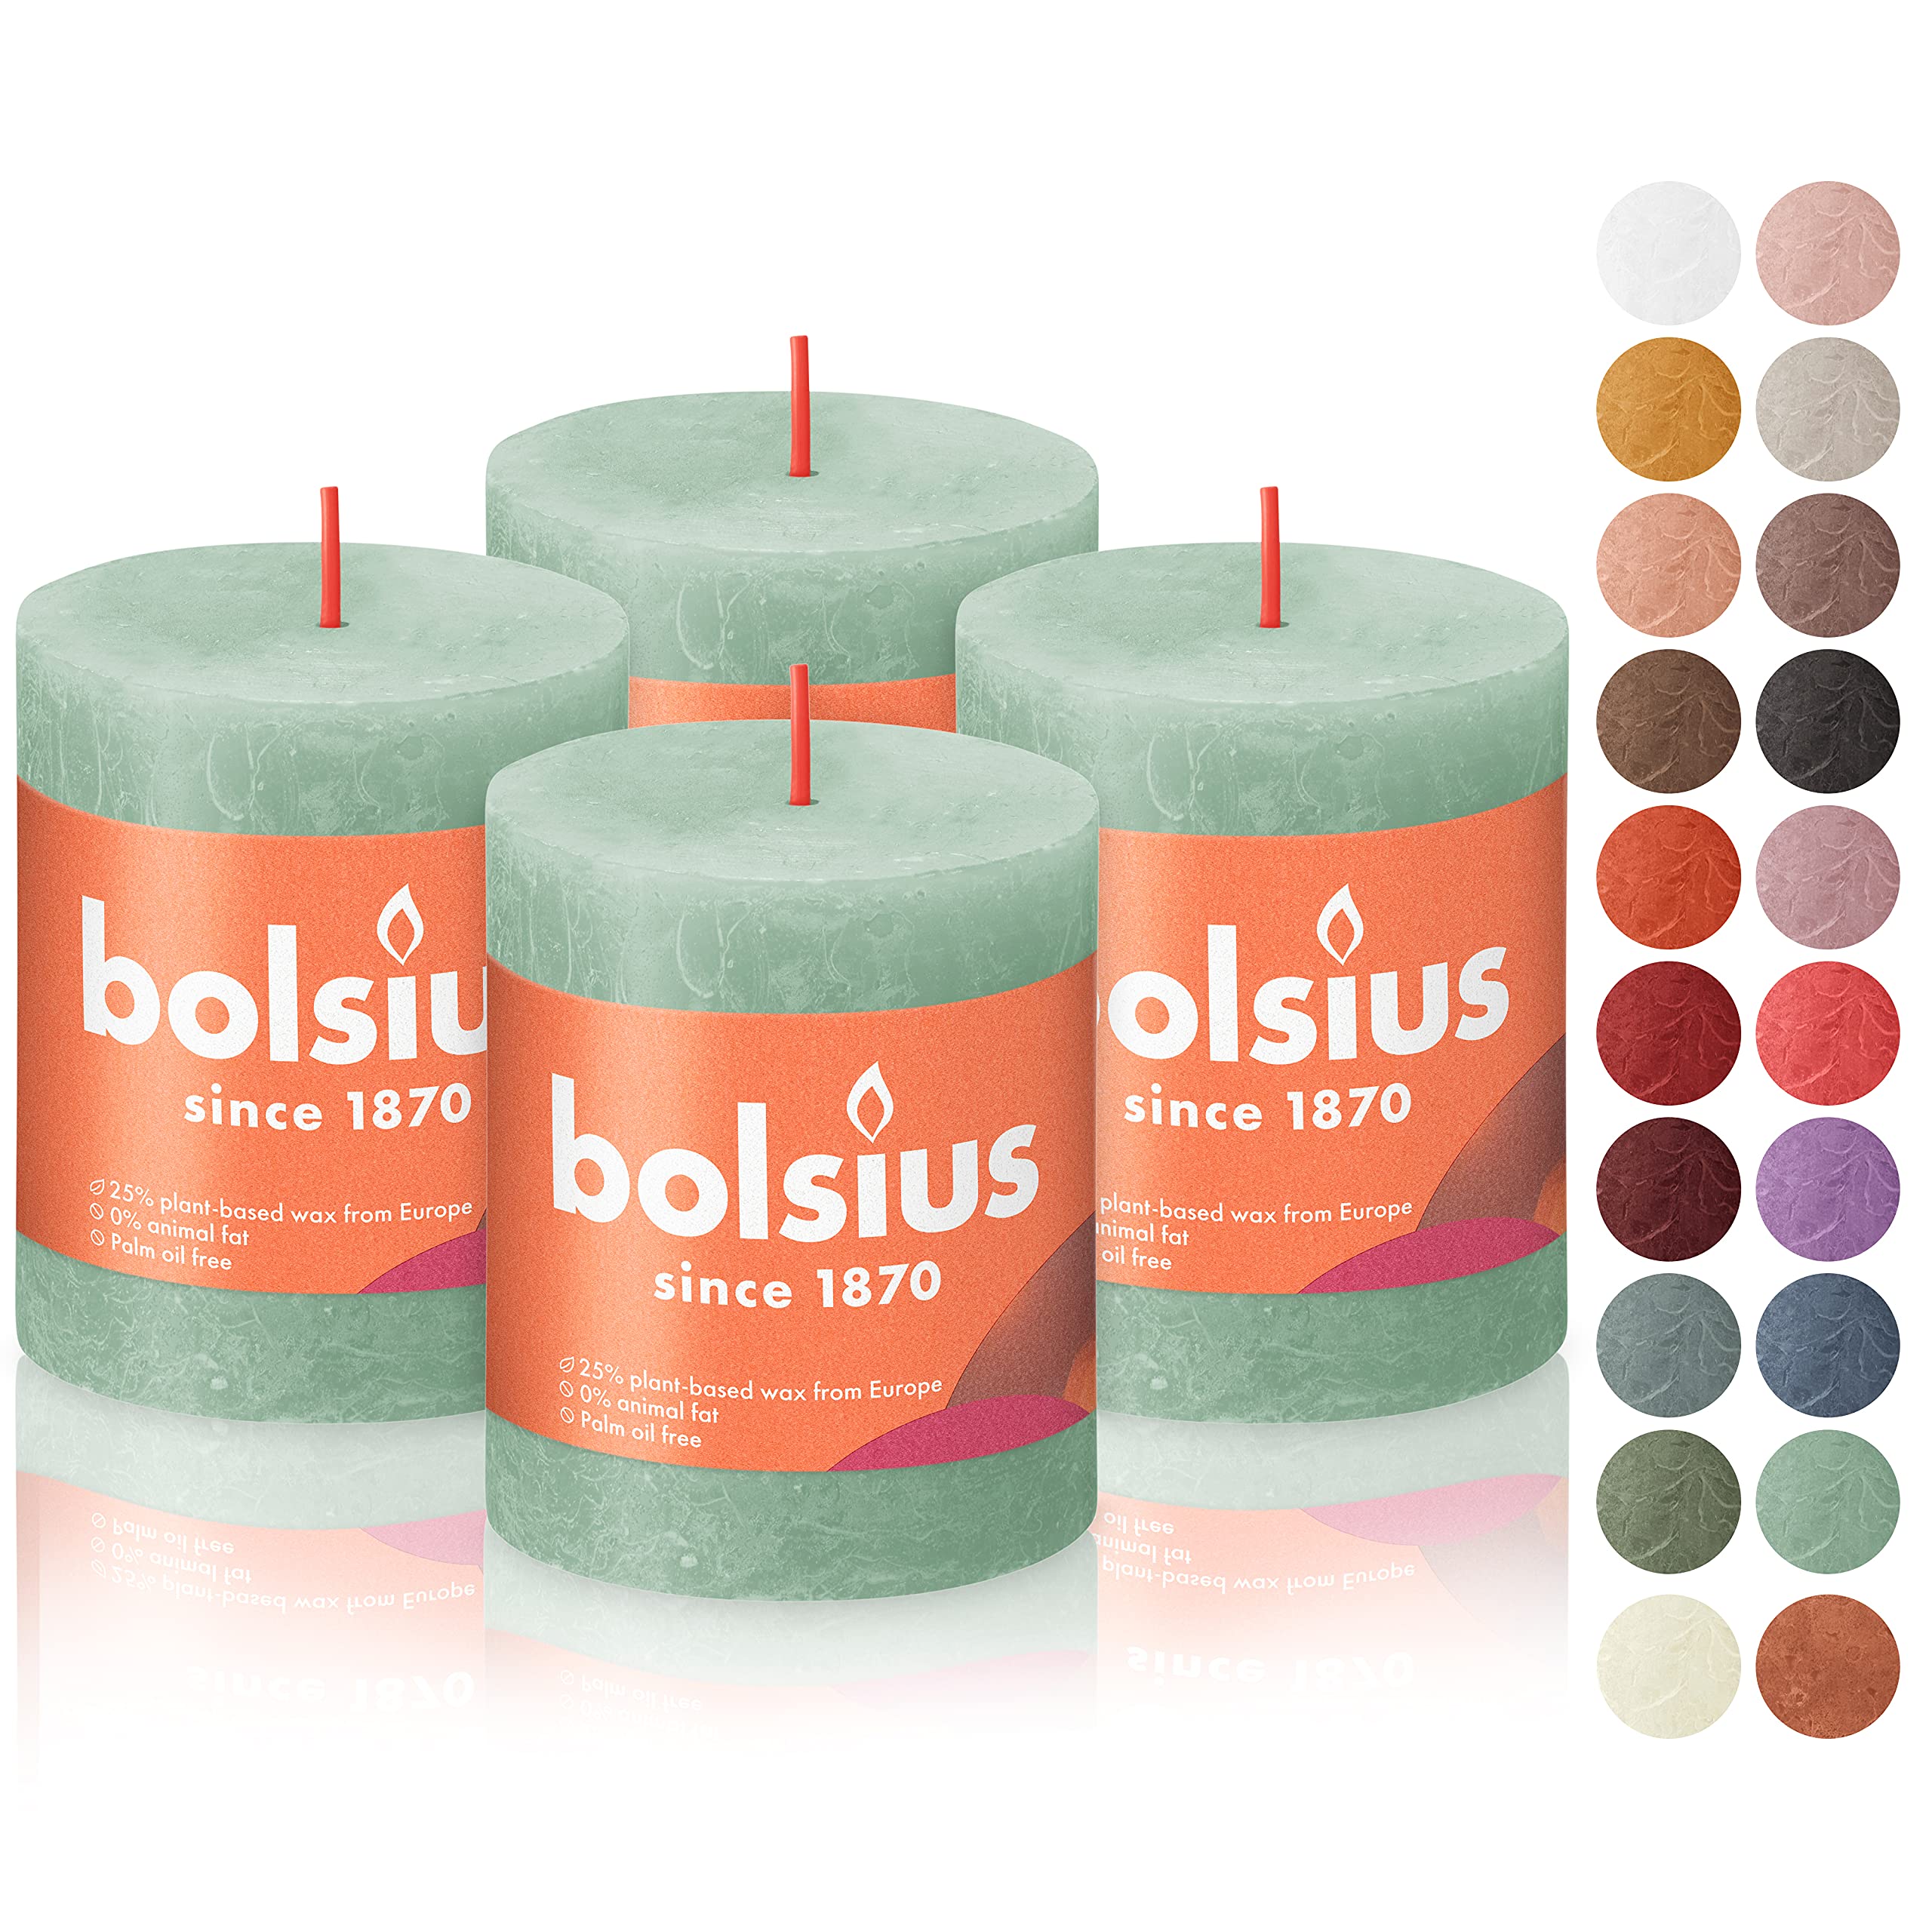 BOLSIUS 4 Pack Sage Green Rustic Pillar Candles - 2.75 X 3.25 inches - Premium European Quality - Includes Natural Plant-Based Wax - Unscented Dripless Smokeless 35 Hour Party and Wedding Candles  - Very Good